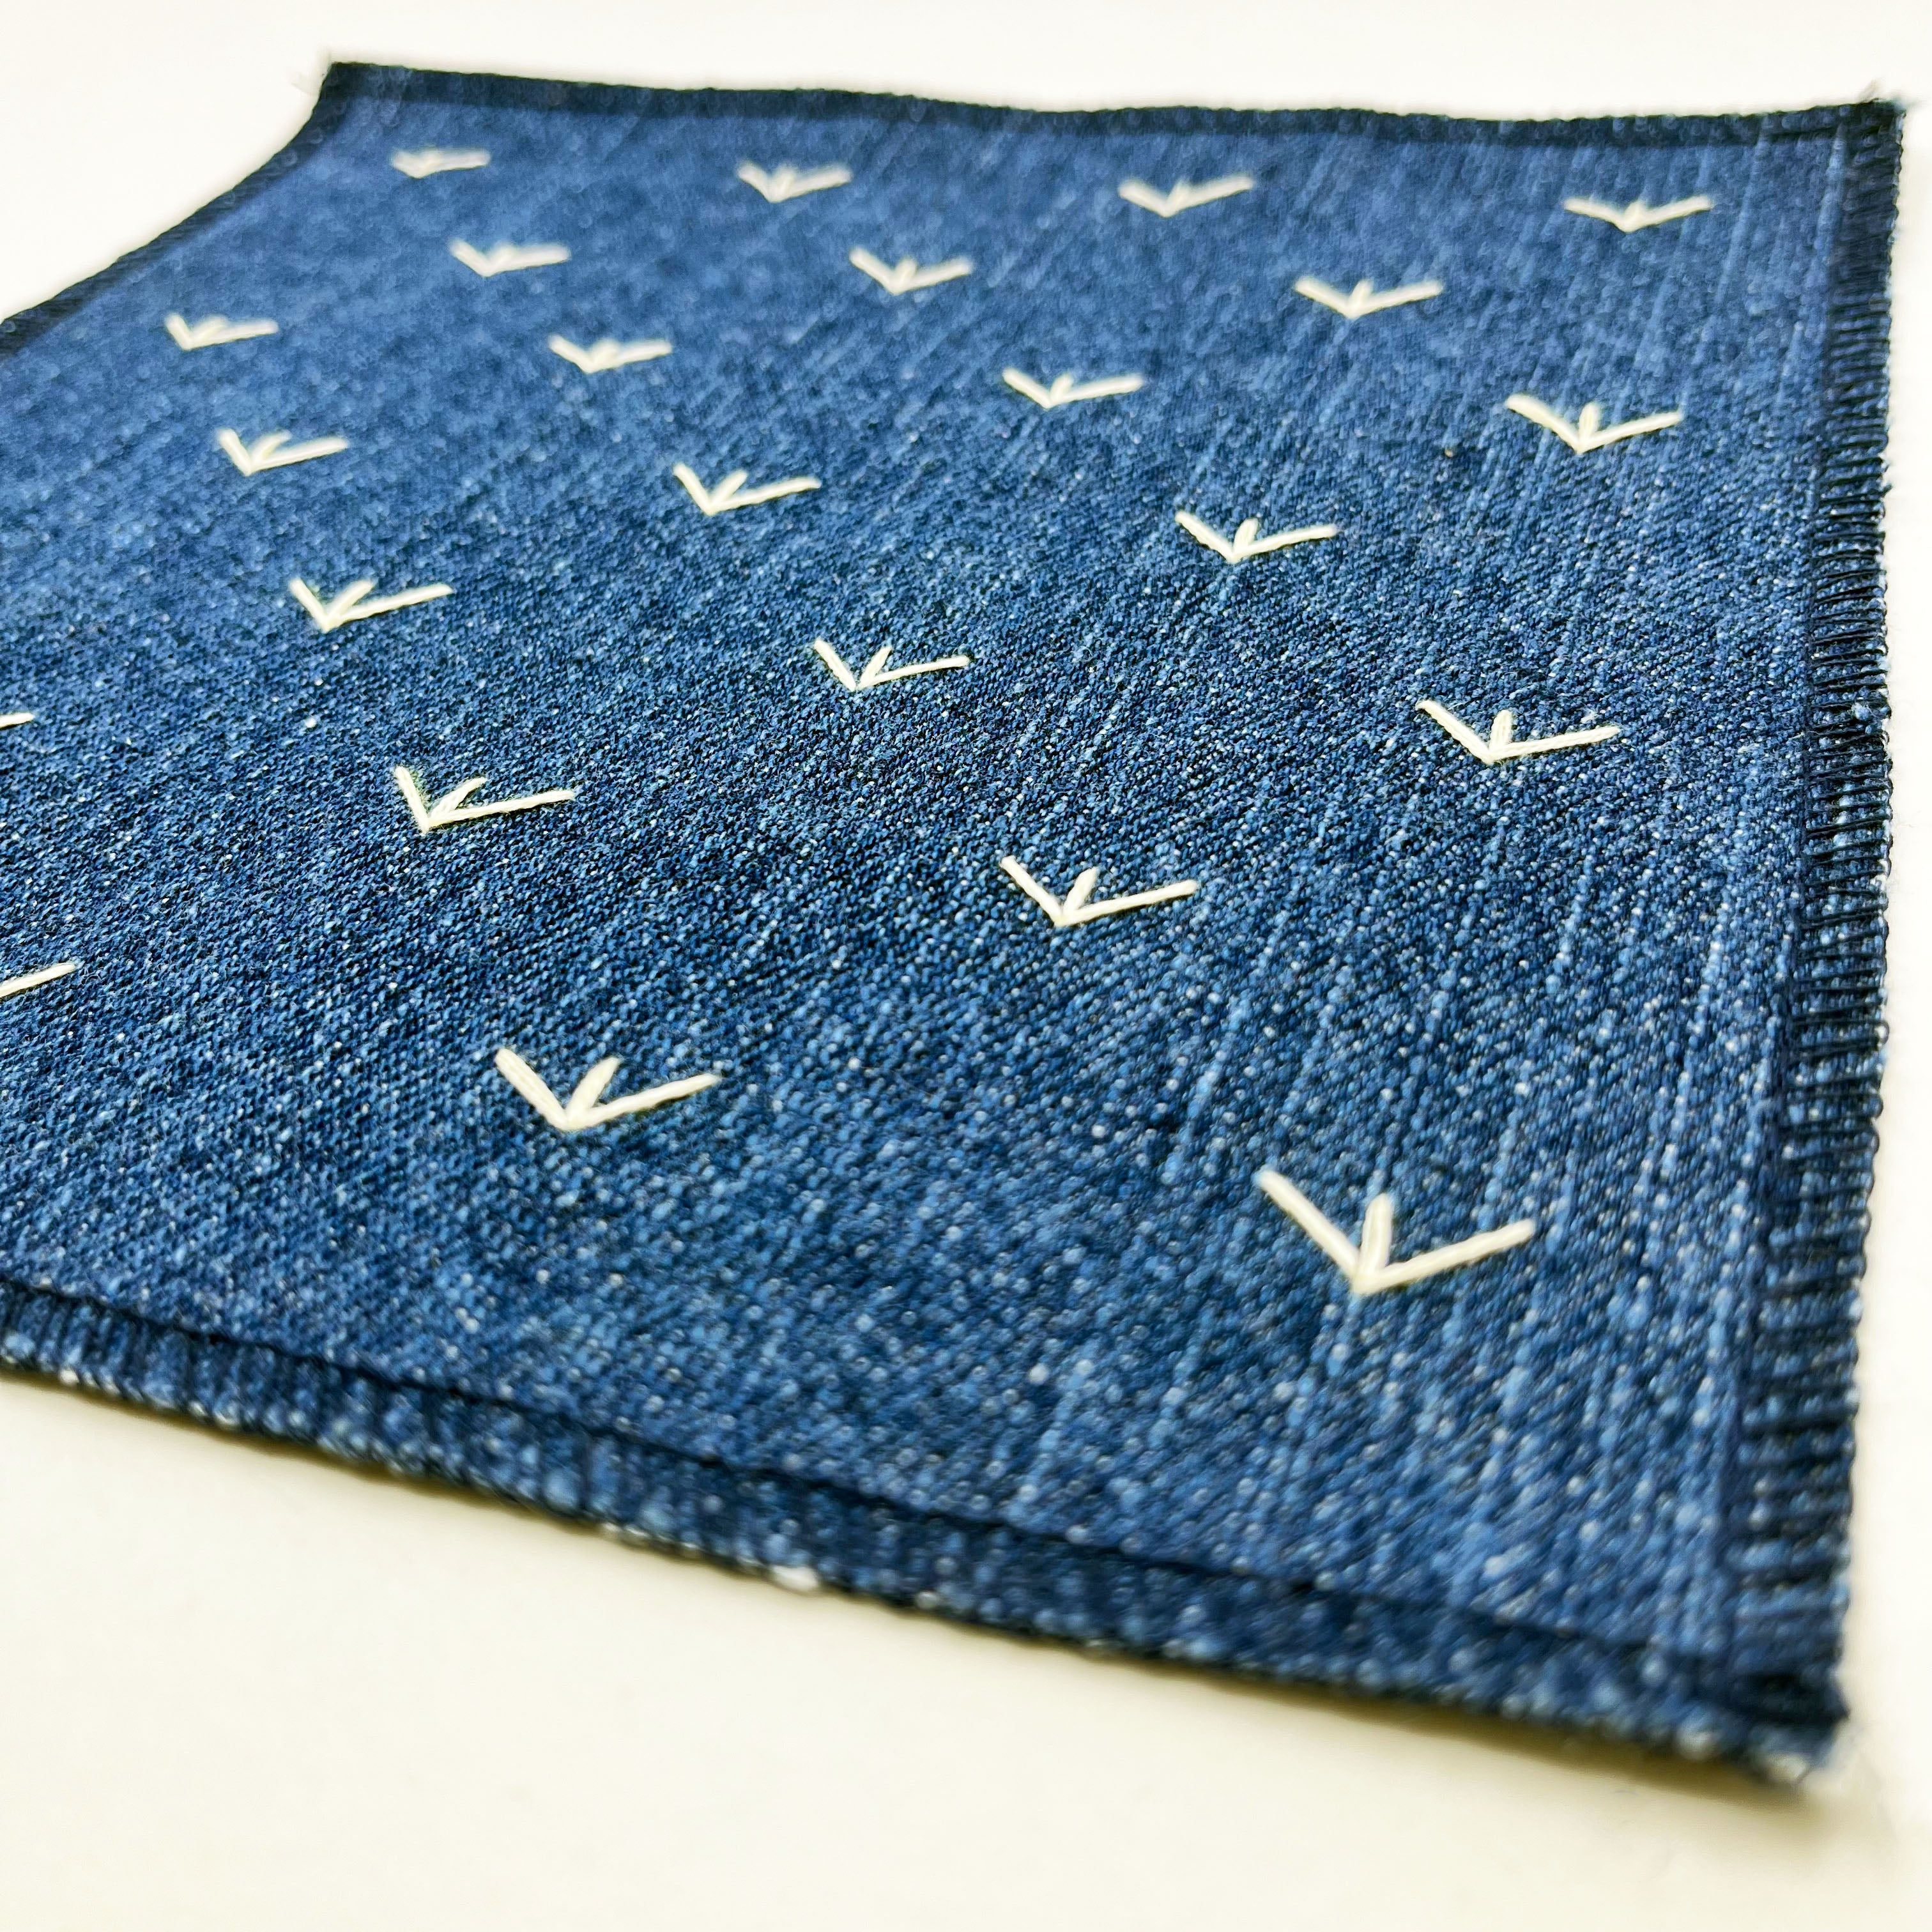 Square Patch with Embroidered Sprouts